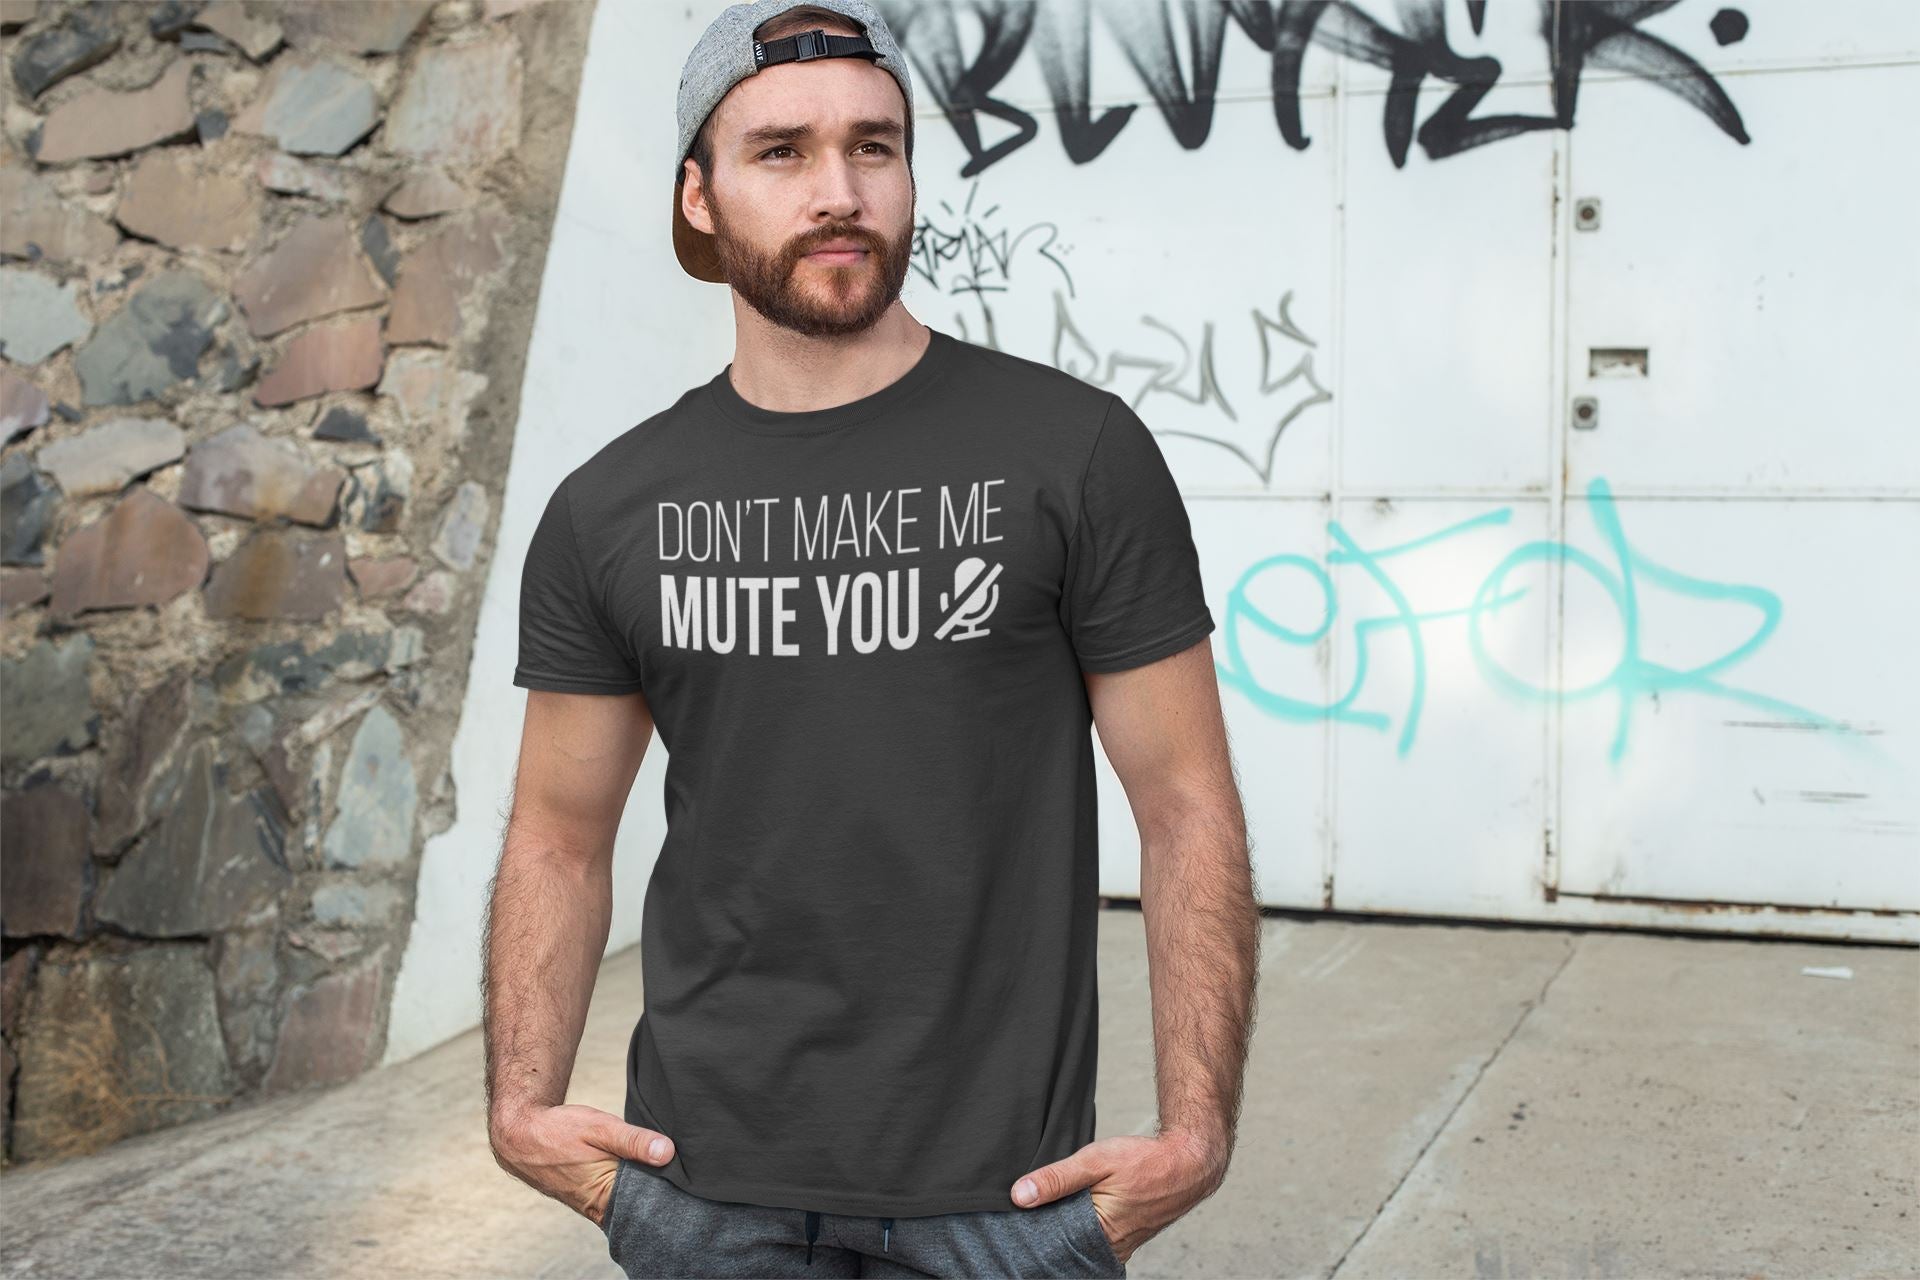 Don't Make Me Mute You Funny Black Swag T Shirt for Men and Women freeshipping - Catch My Drift India